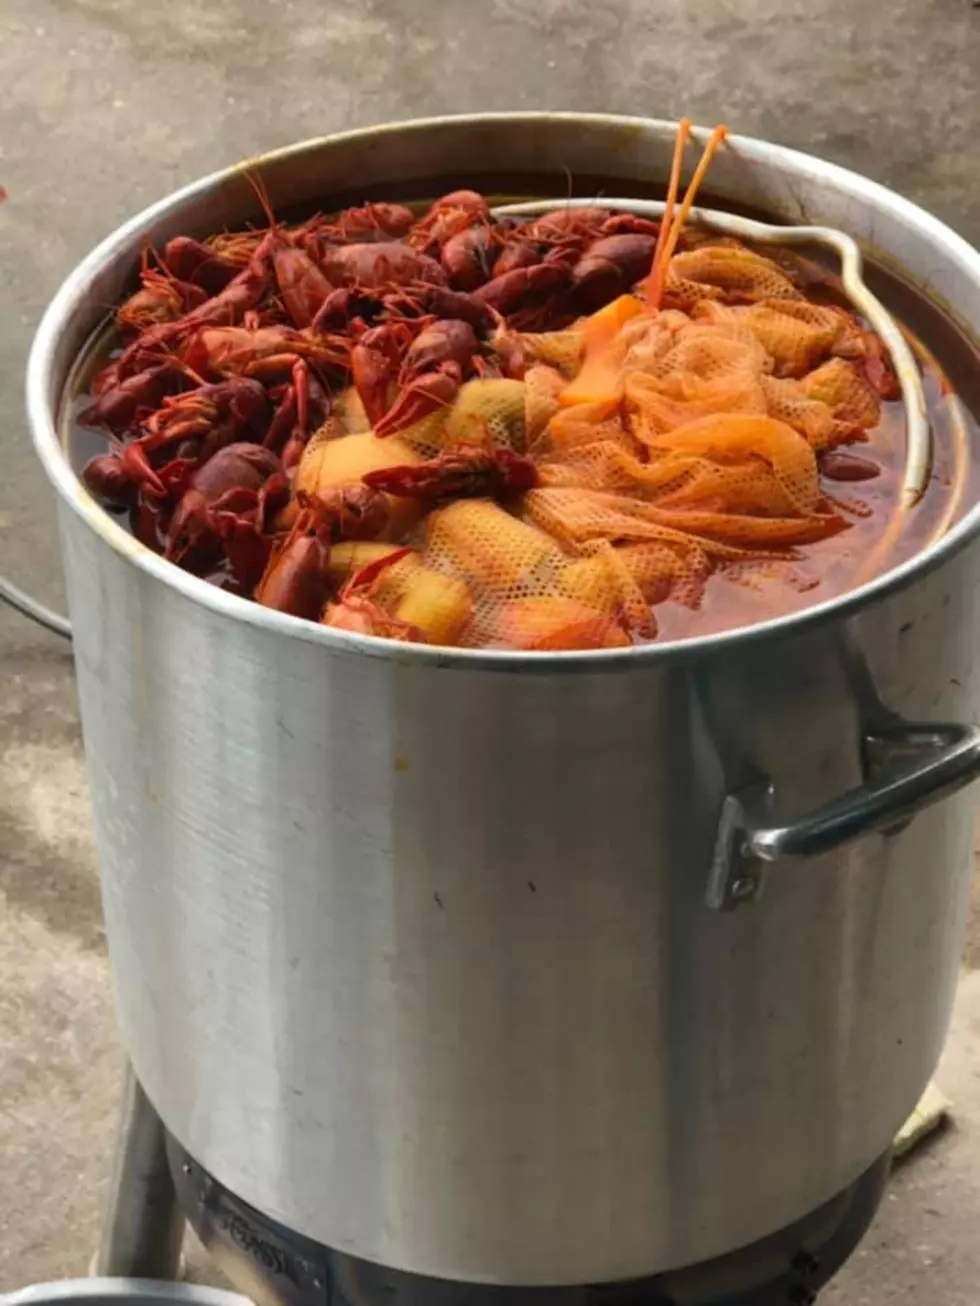 Win Our Good Friday Crawfish Boil -- Enter Here